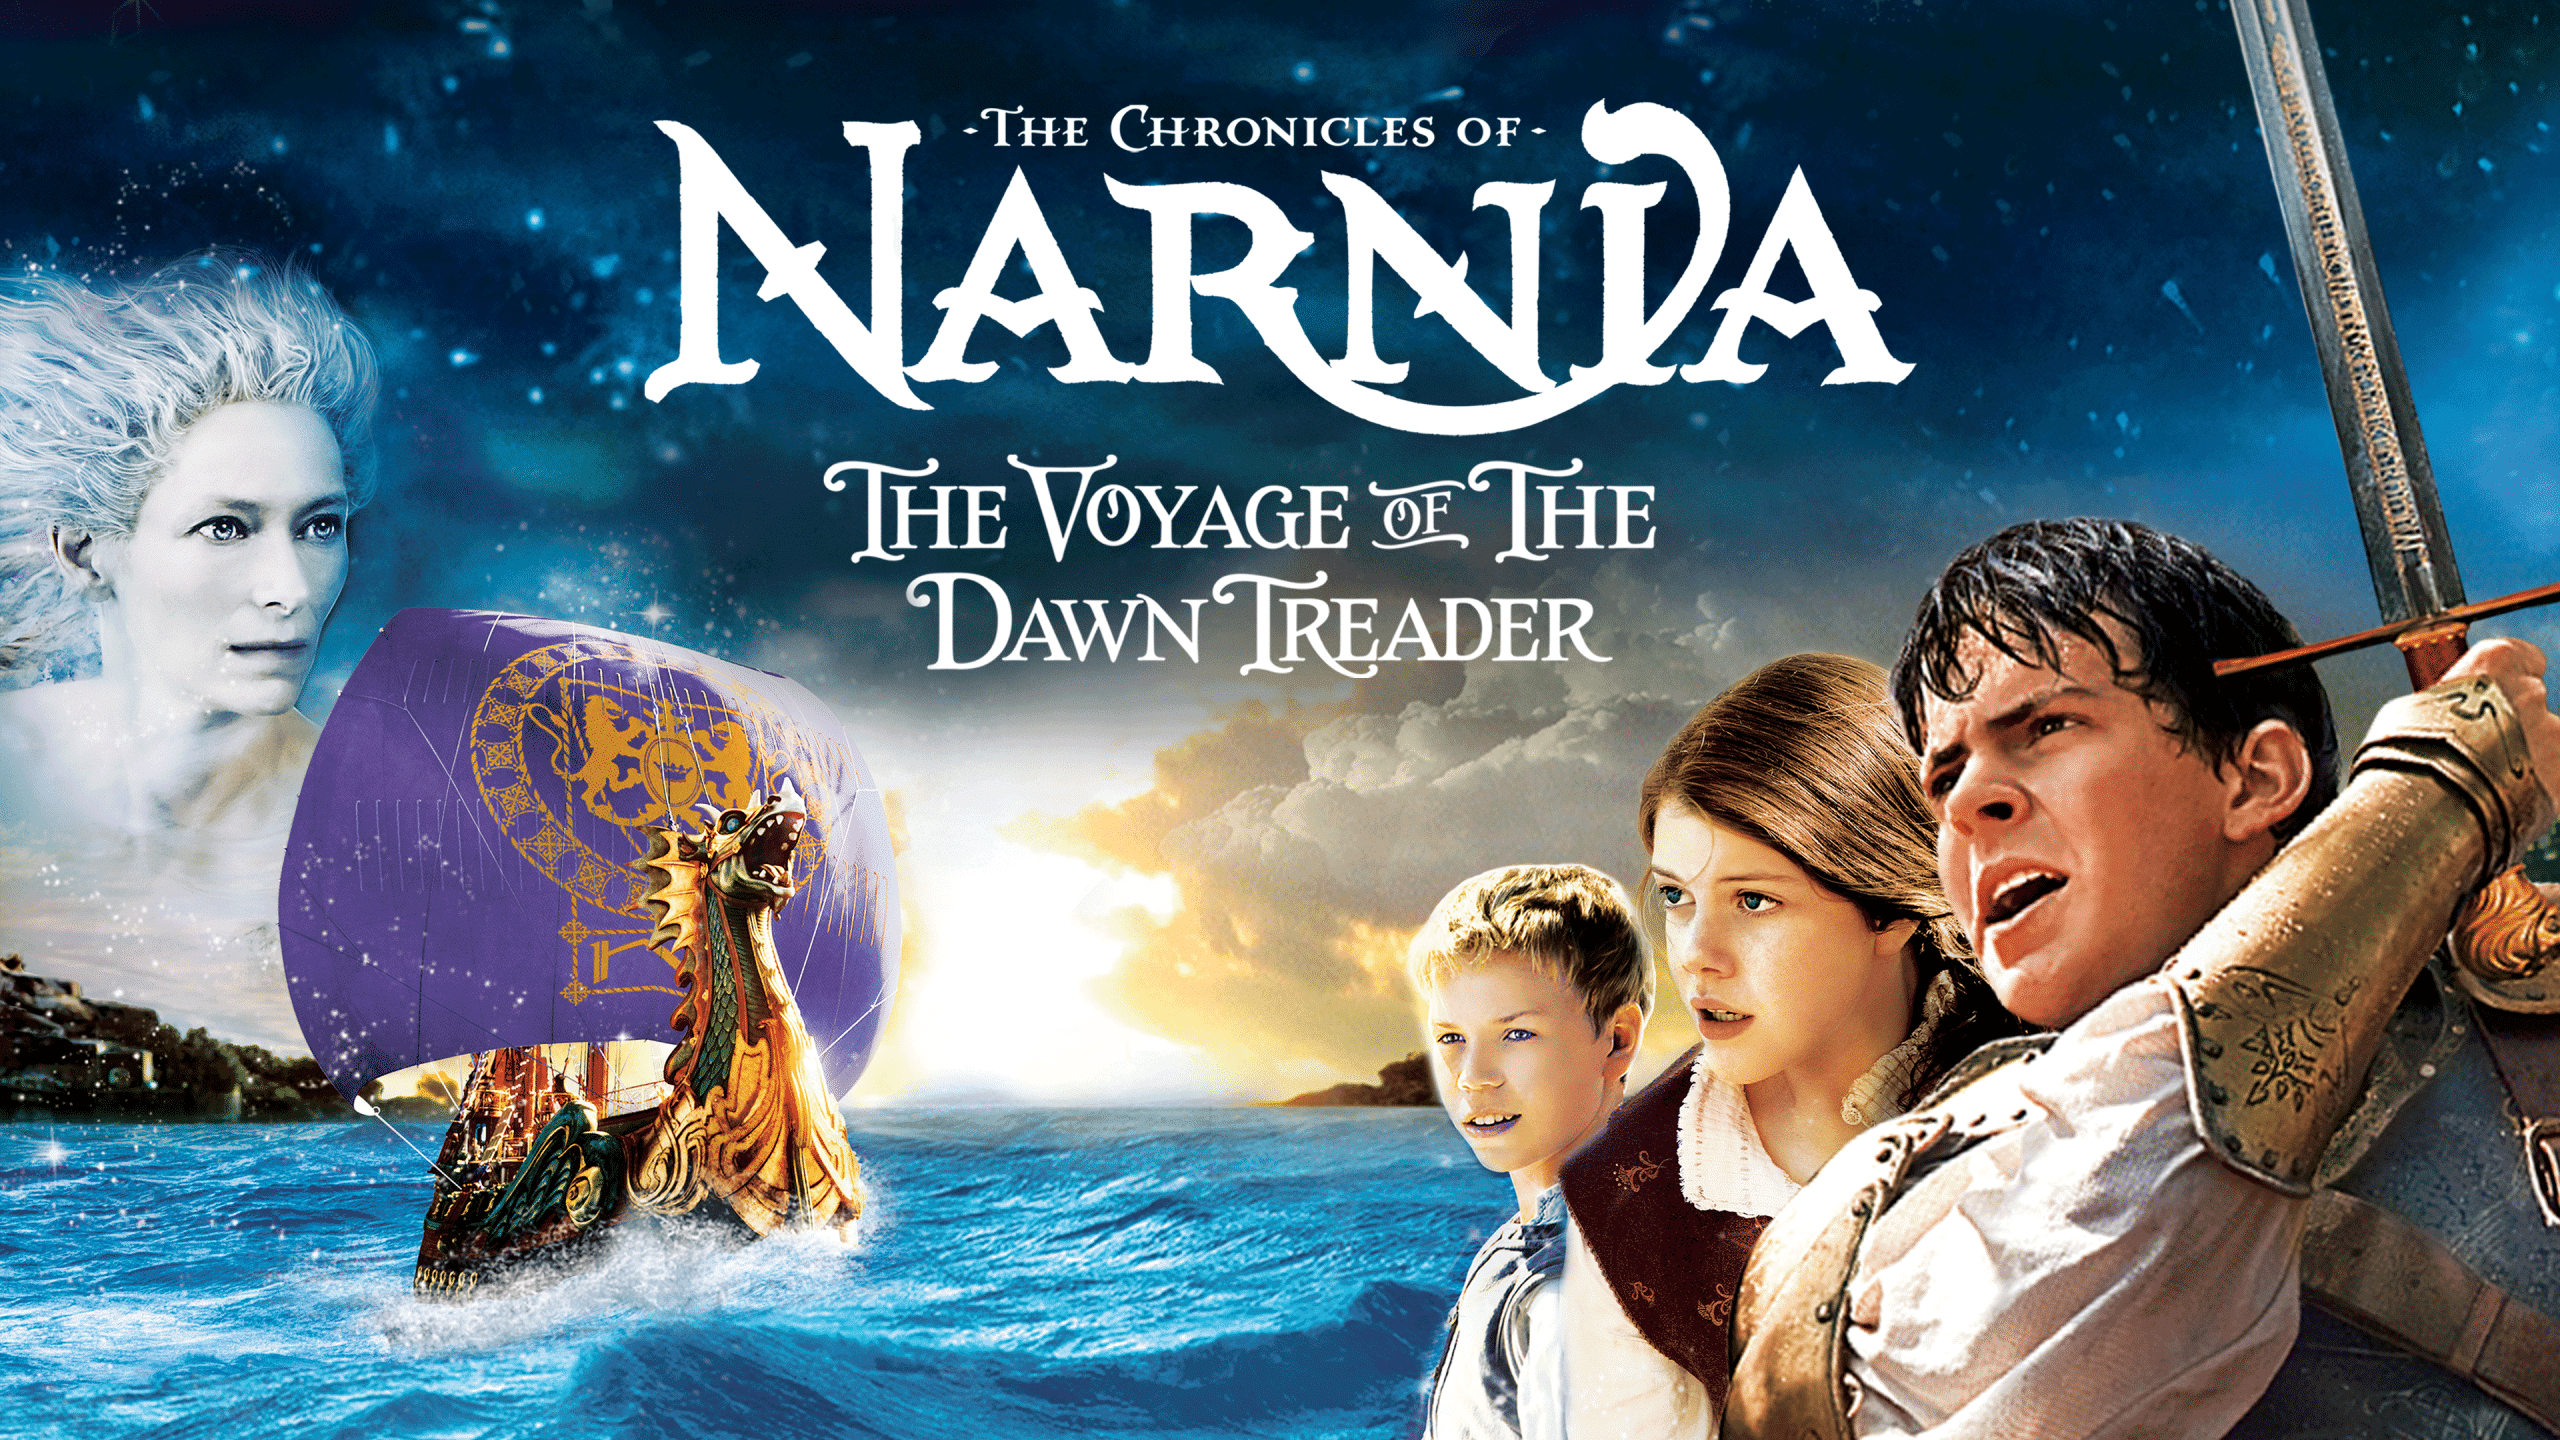 https://www.stgindy.org/wp-content/uploads/2023/04/Voyage-of-the-Dawn-Treader.png